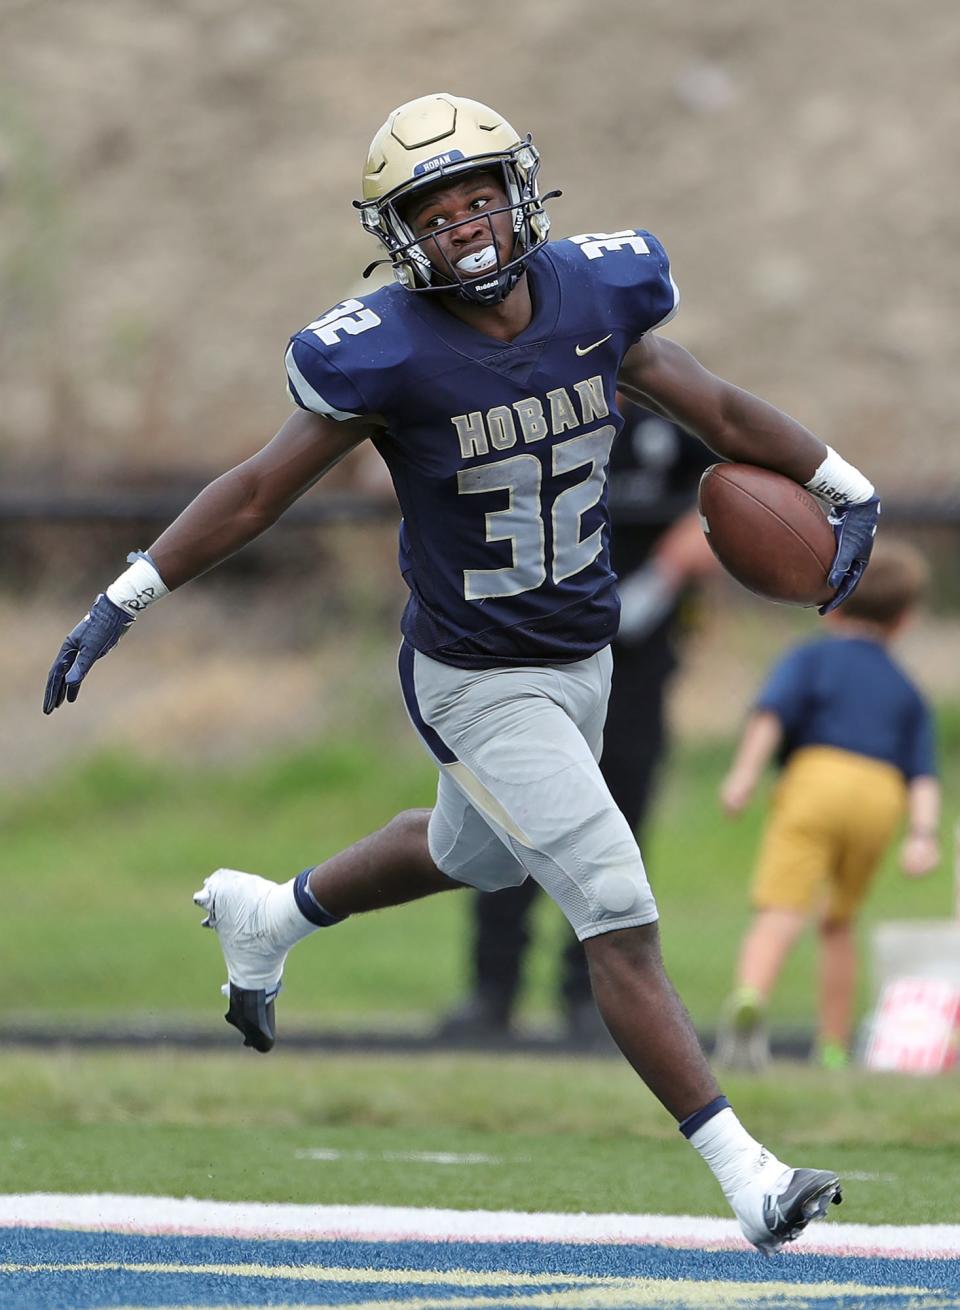 Hoban running back Lamar Sperling scores an 89-yard rushing touchdown during the second half of a high school football game against Iona Prep, Saturday, Sept. 3, 2022, in Akron, Ohio.